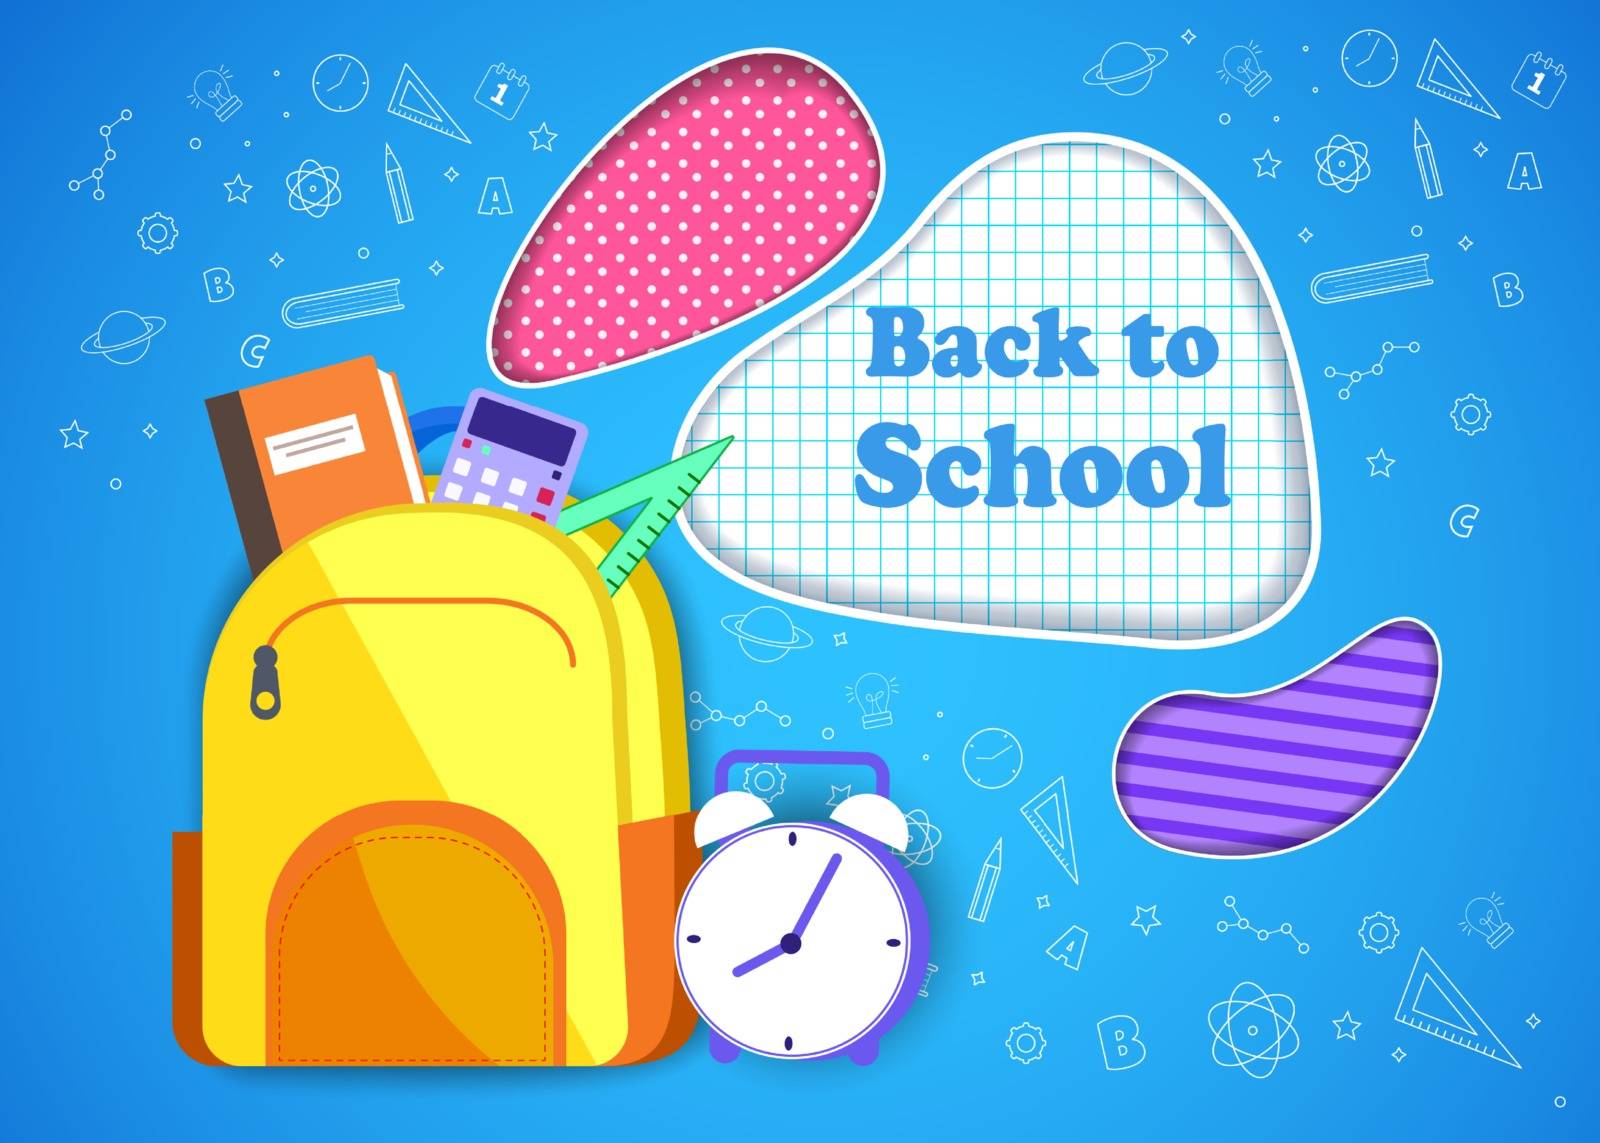 Colorful back to school templates for invitation, poster, banner, promotion,sale etc. School supplies cartoon illustration. Vector back to school design templates by Helenshi